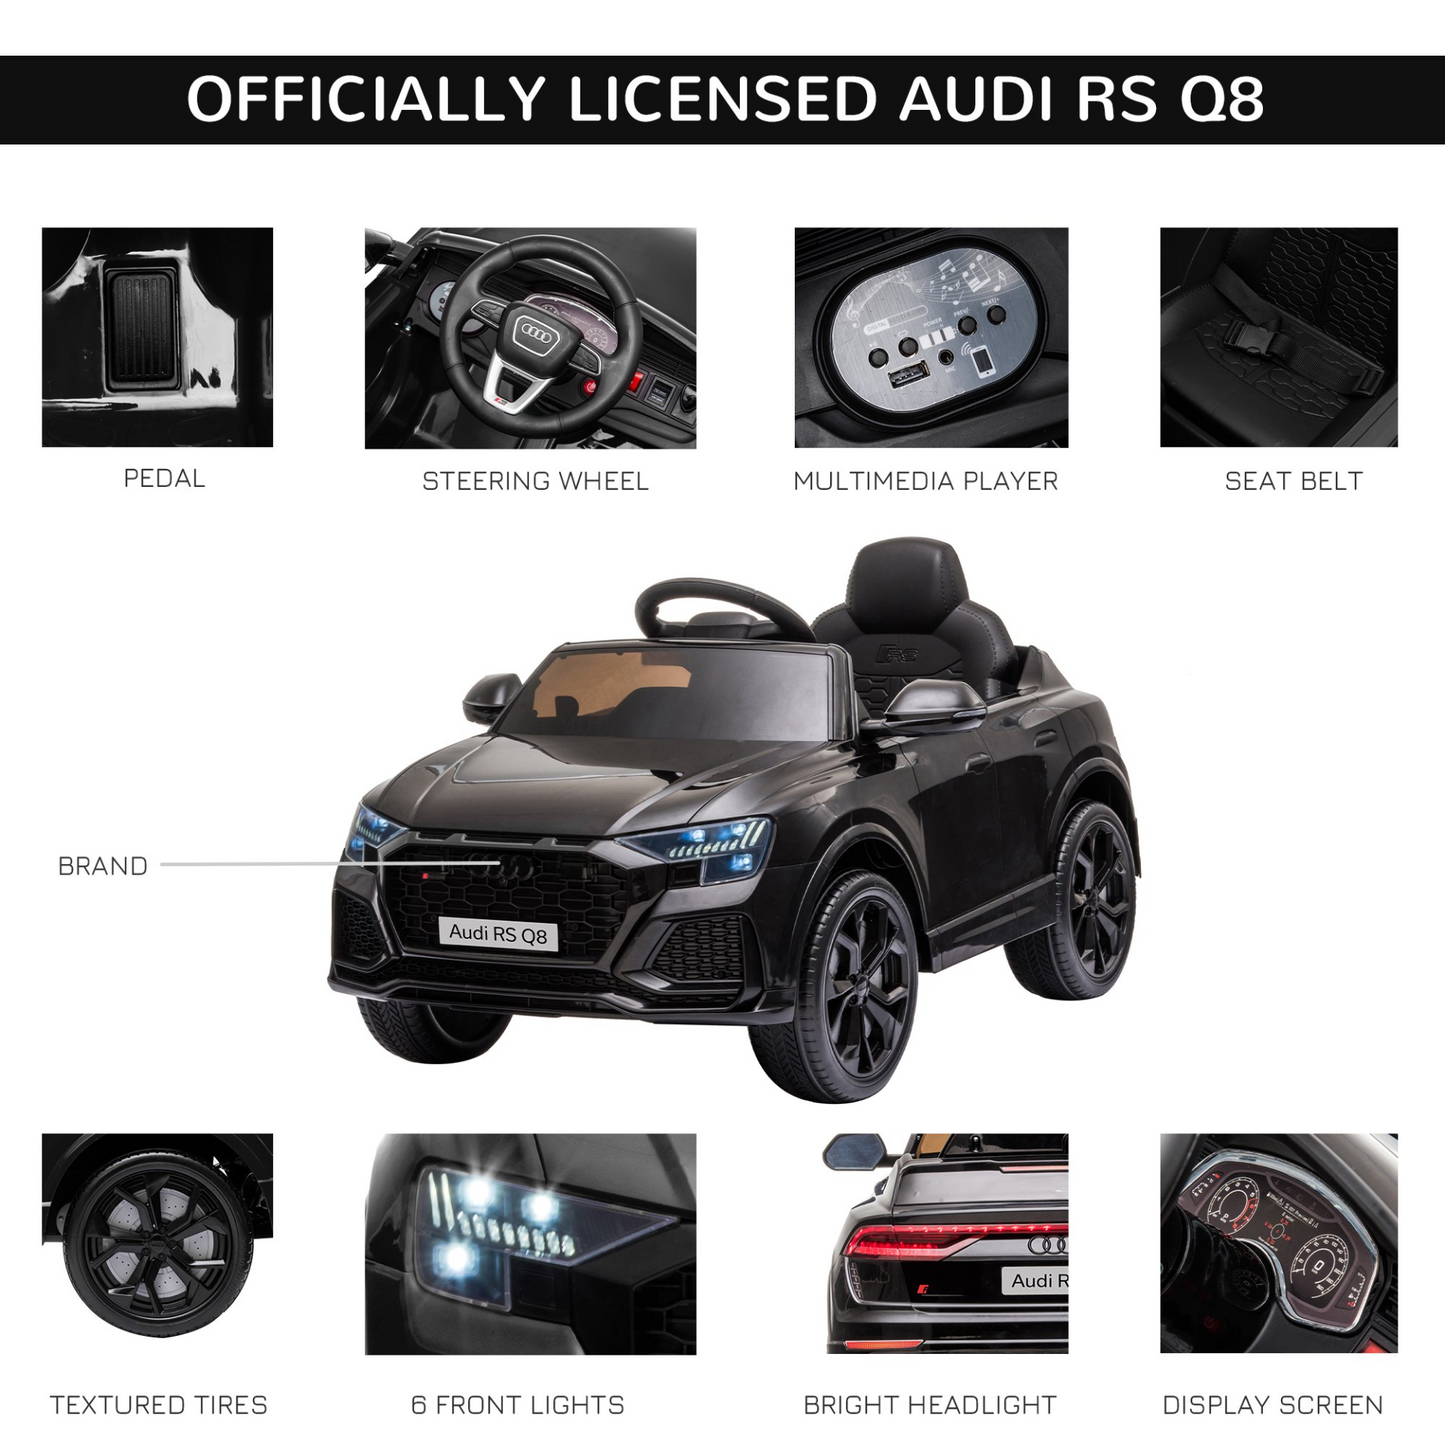 HOMCOM 6V Kids Electric Ride On Car RS Q8 Licensed Toy Car with Remote Control Music Lights USB MP3 Bluetooth for 3-5 Years Old Black